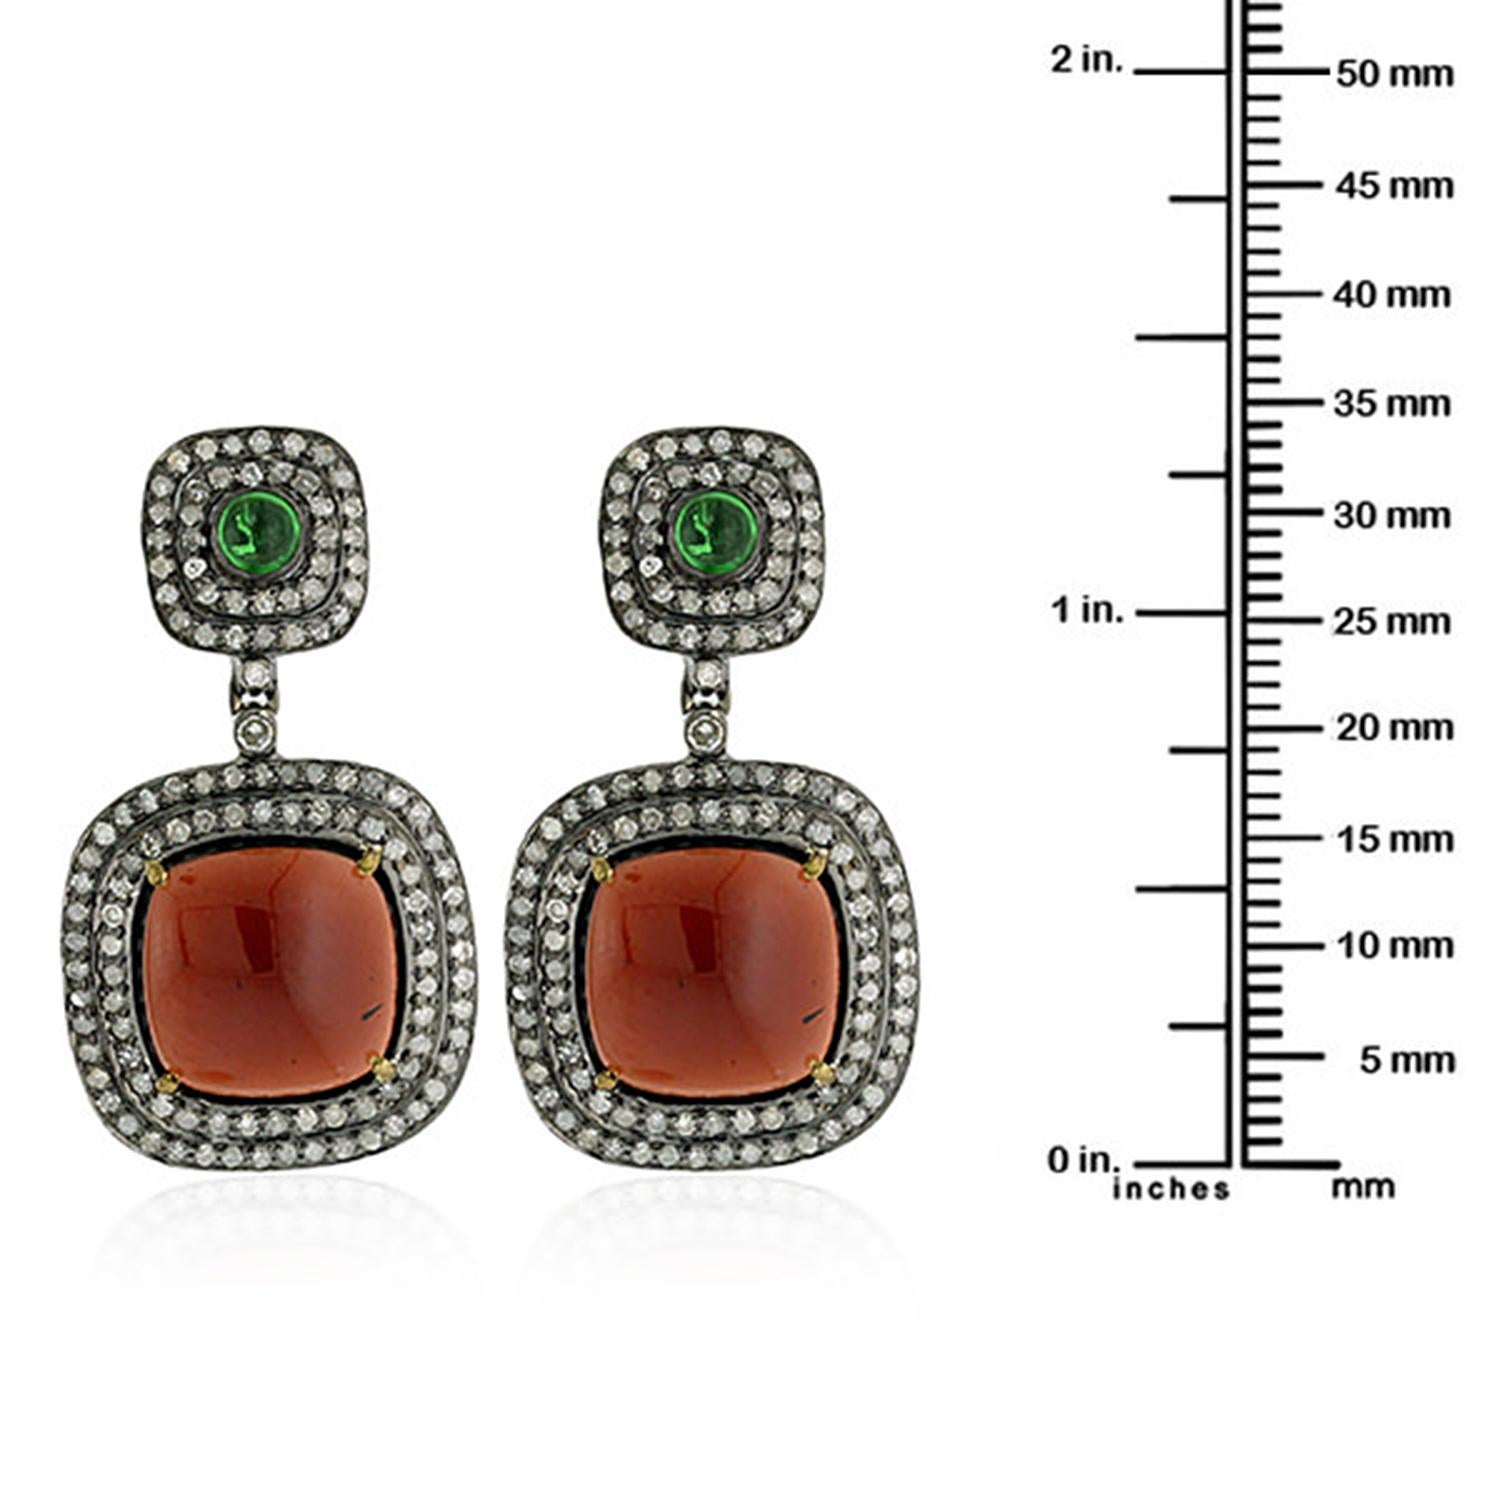 Mixed Cut Cushion Shaped Garnet & Tsavorite Earring with Diamond Made in 18k Gold & Silver For Sale